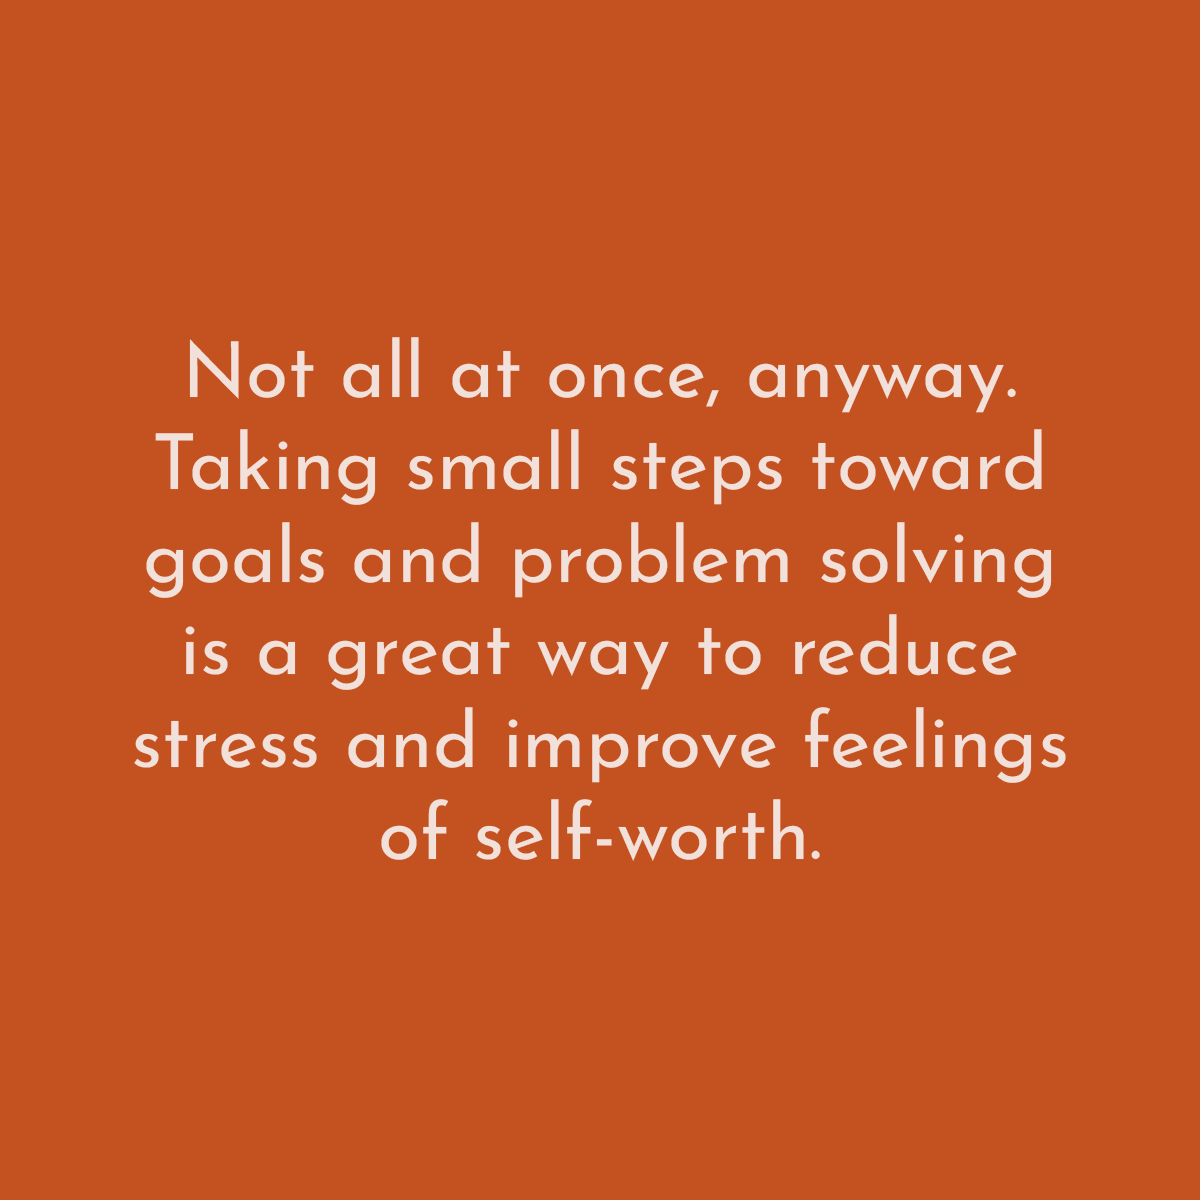 Not all at once, anyway. Taking small steps toward goals and problem solving is a great way to reduce stress and improve feelings of self-worth.